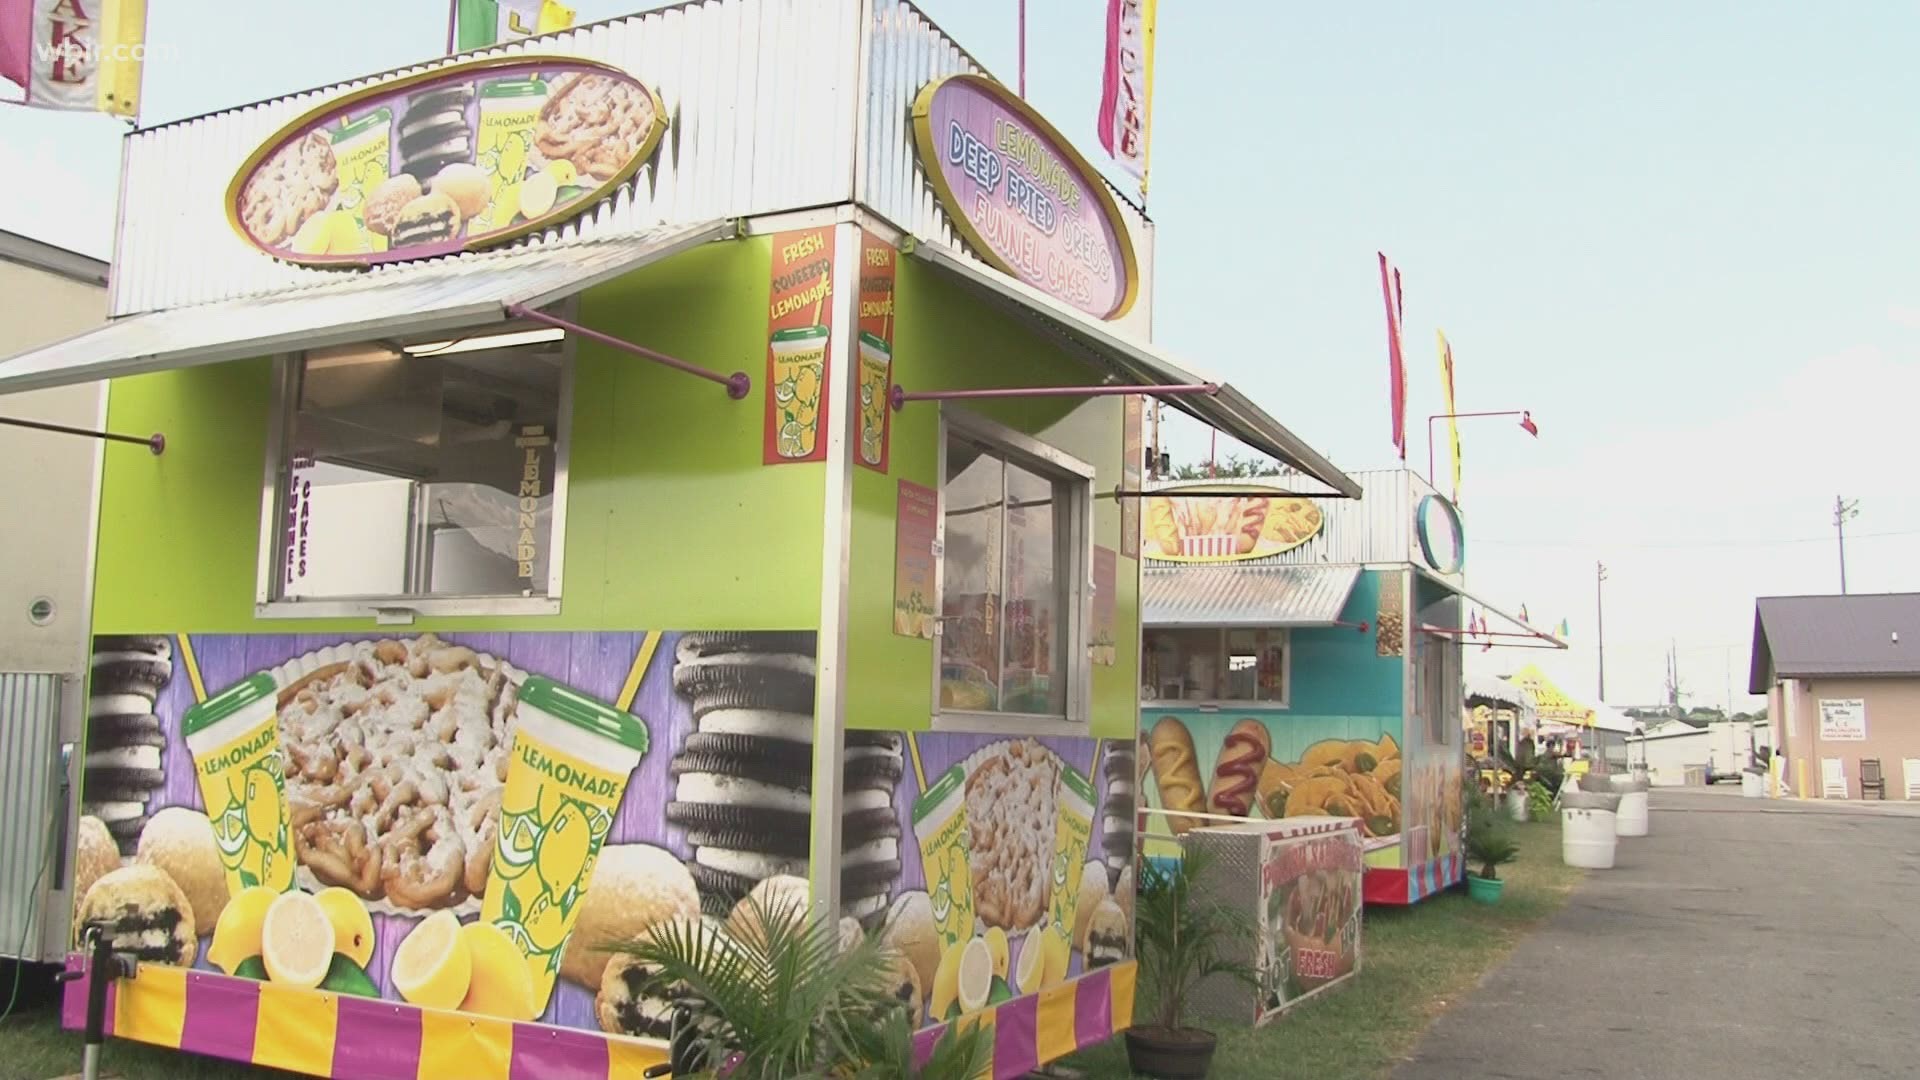 One of East Tennessee's favorite summer events will return next week with lots of fair food and fun!